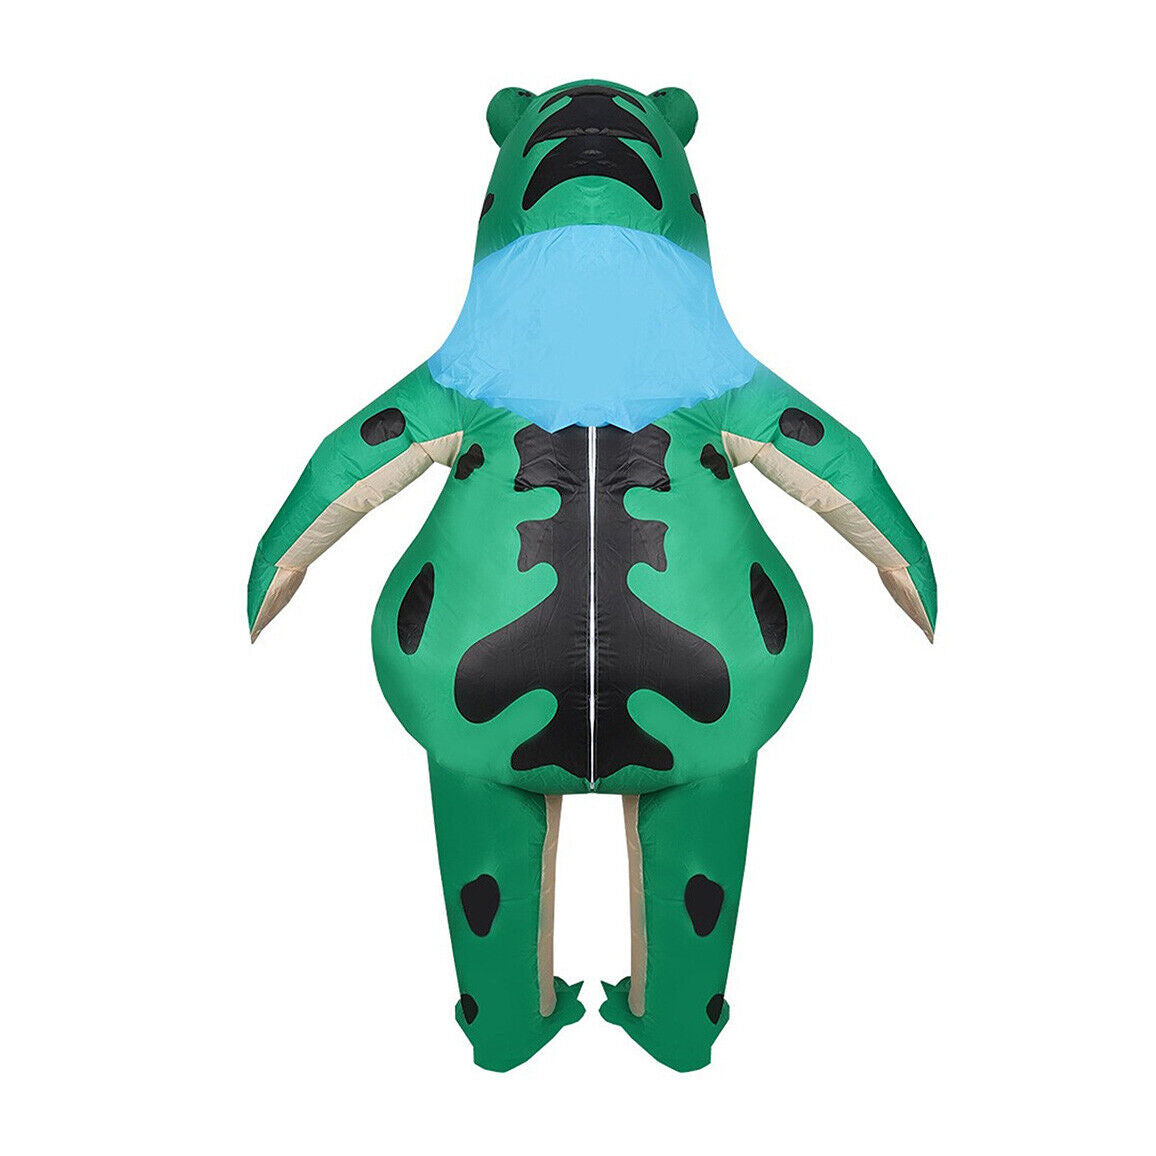 150-190cm Adult Inflatable Frog Costume- Party Dress up Halloween Anime Cosplay